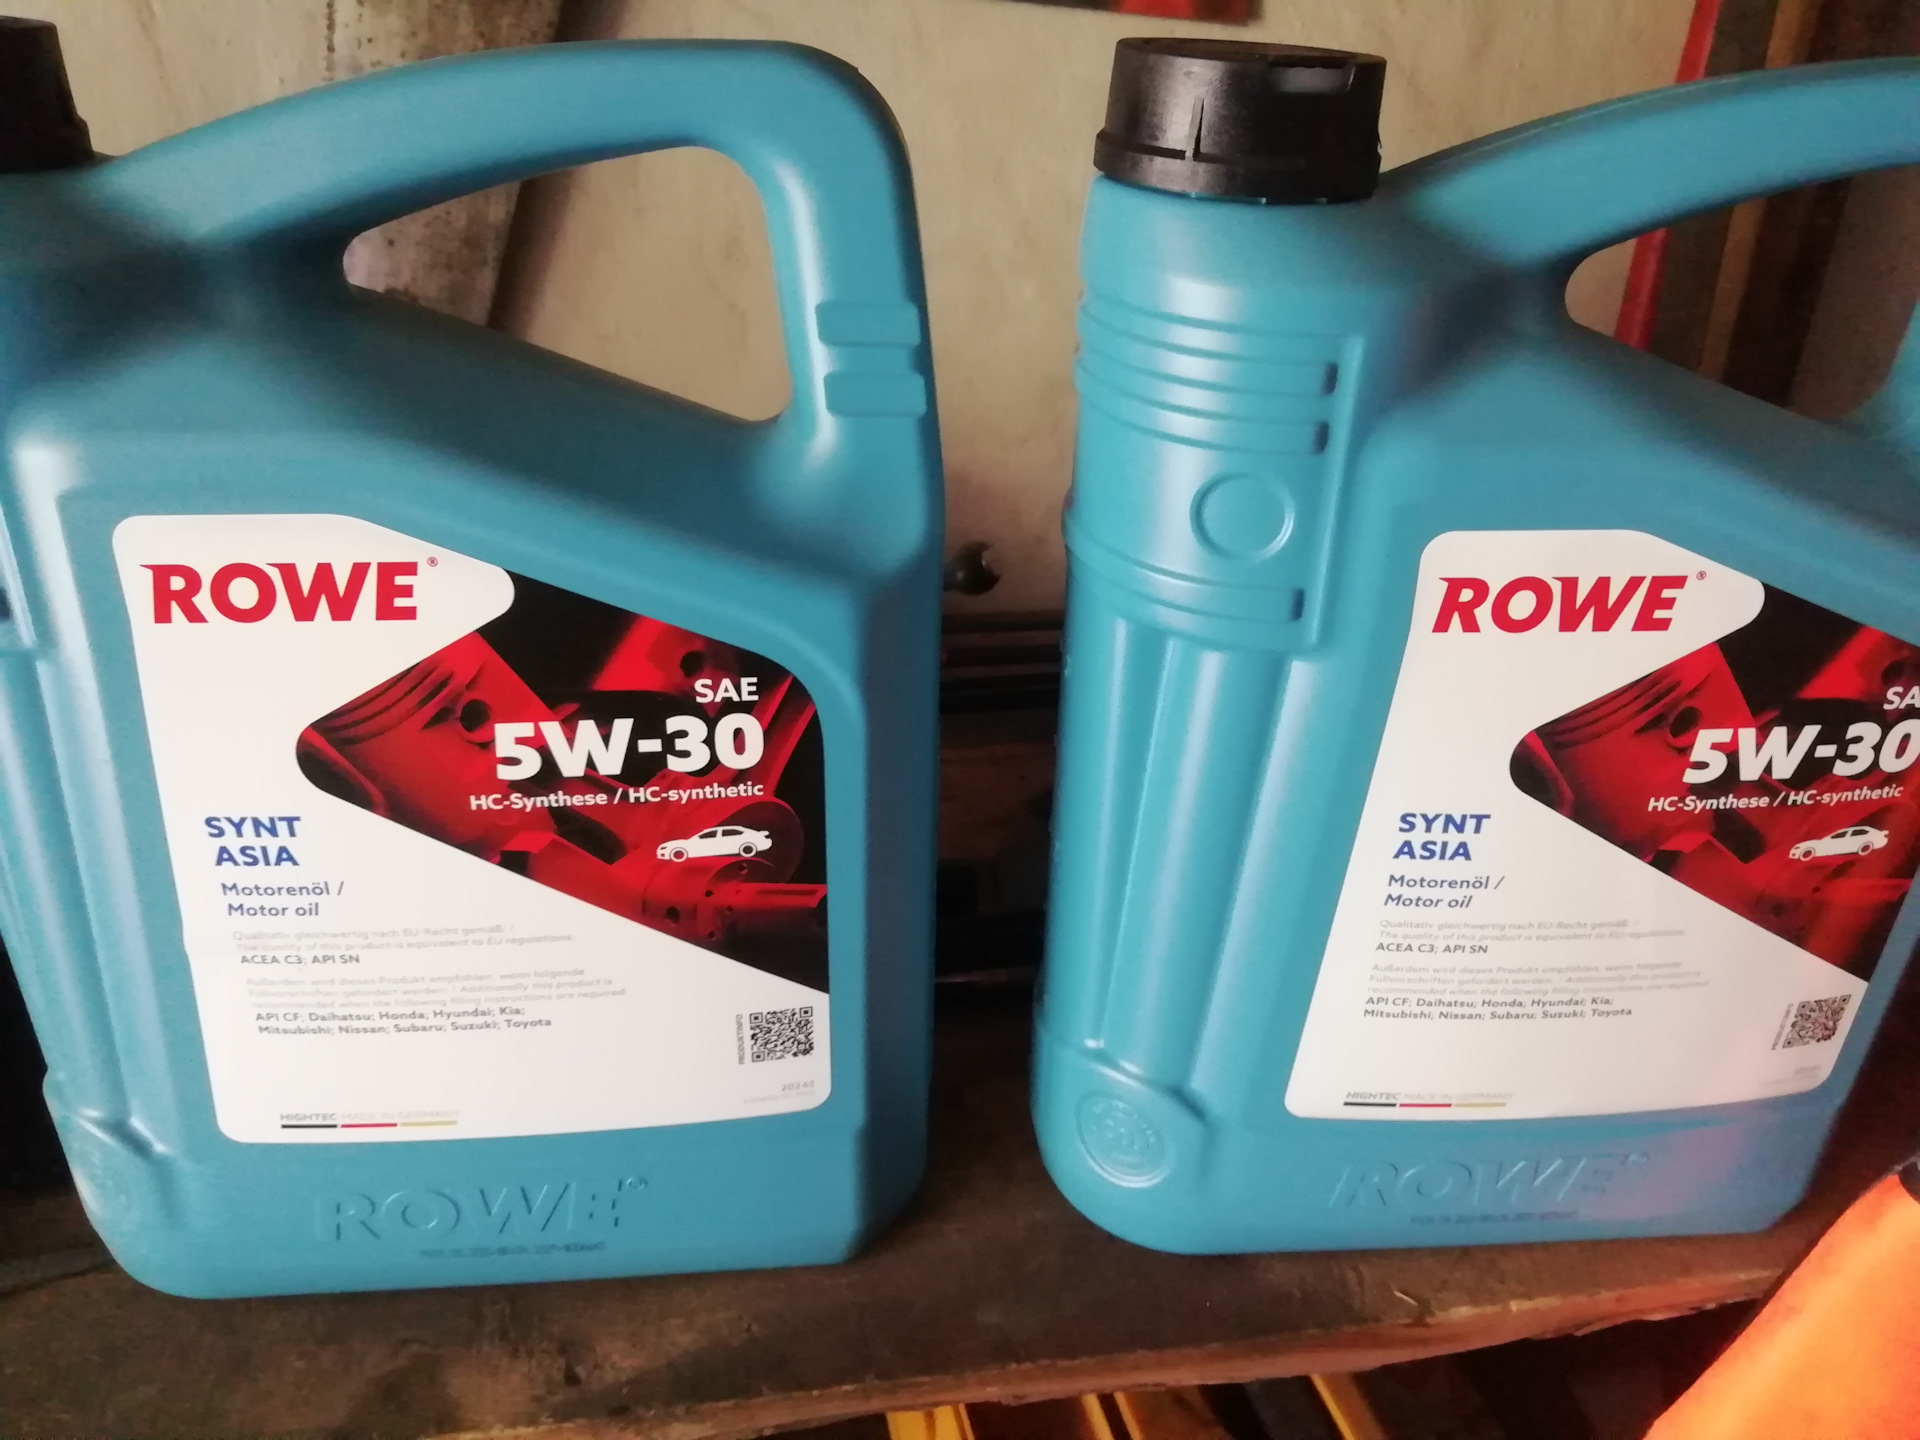 Rove масло. Rowe 5w40. Масло Rowe drive2. Немецкое масло Rowe. Моторное масло Rowe канистры.